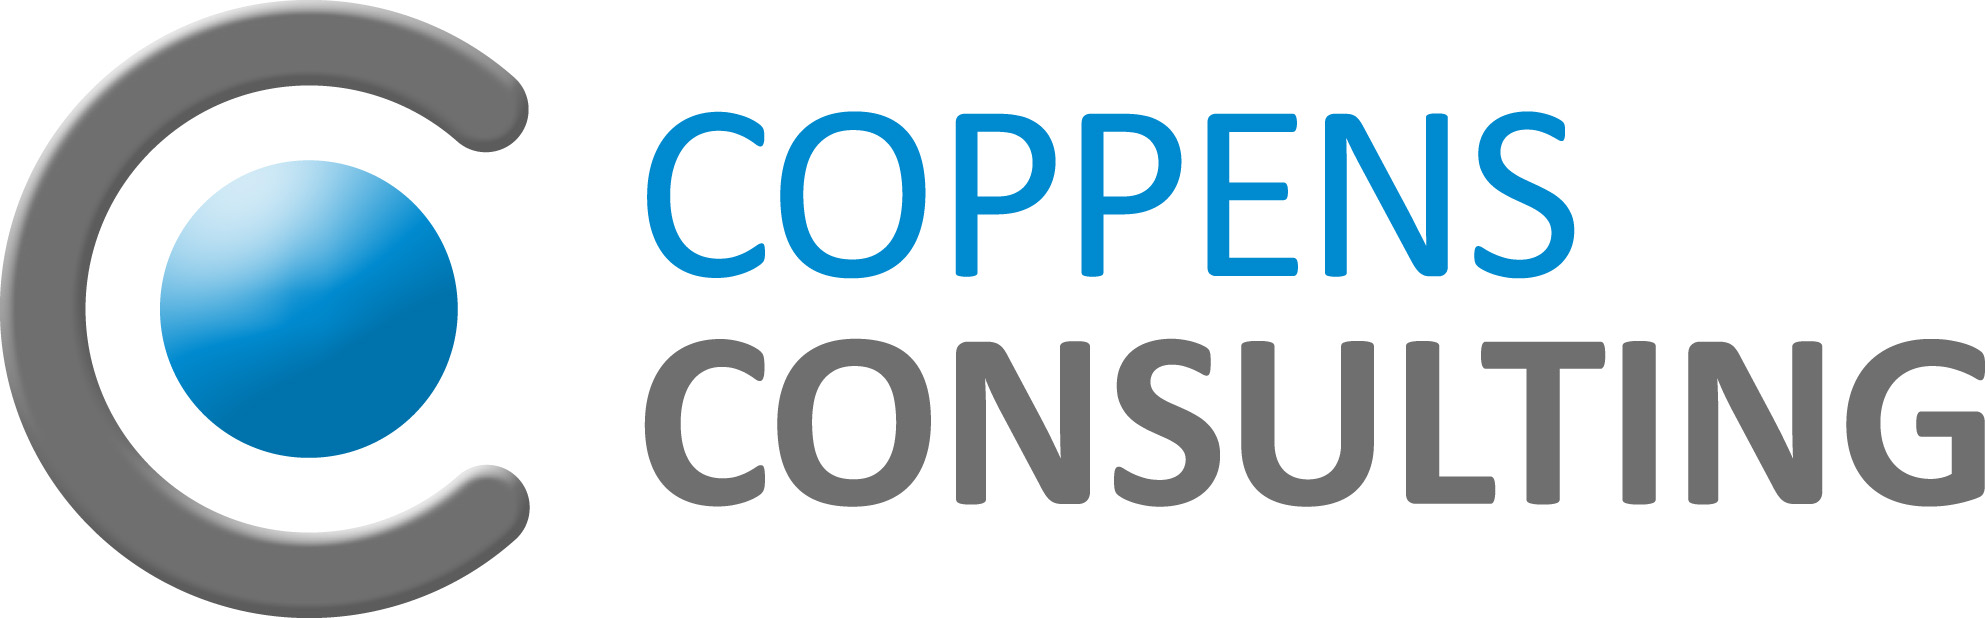 Coppens Consulting